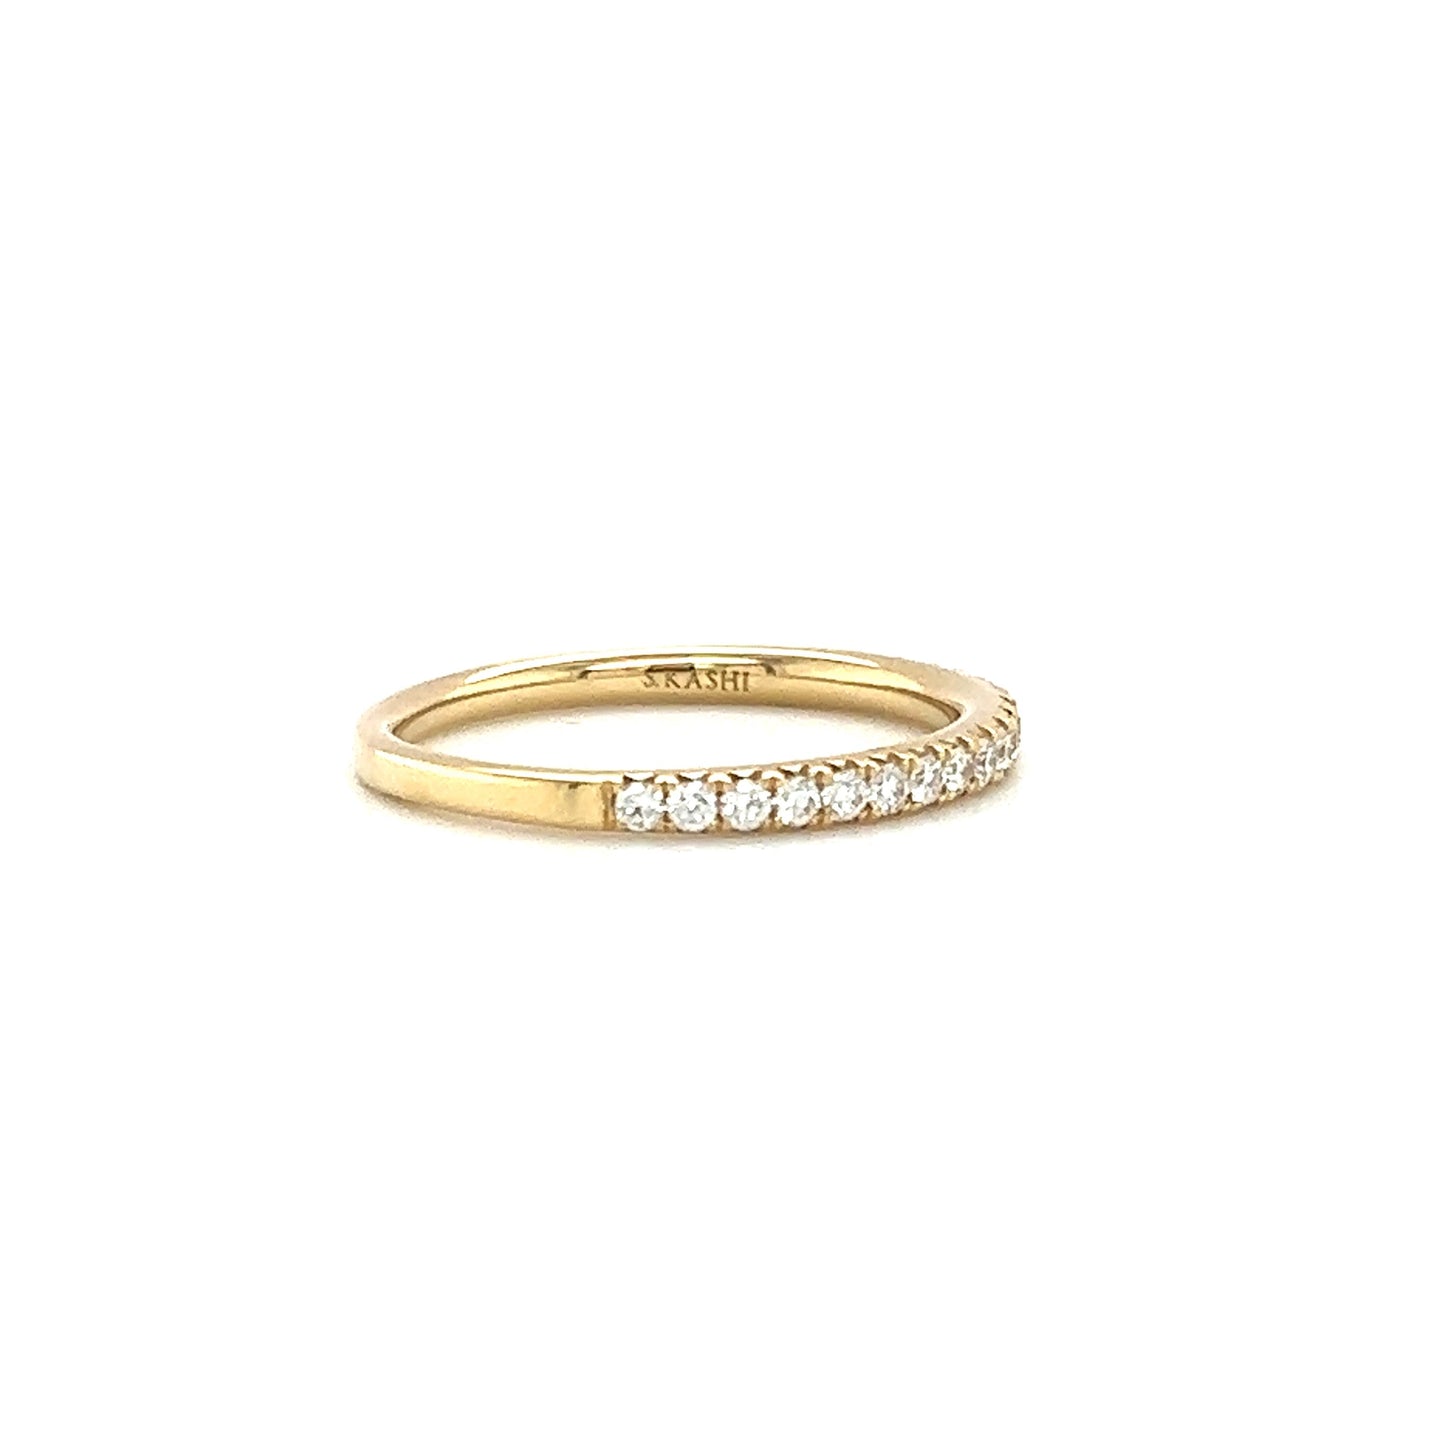 Diamond Ring with Twenty Four Diamonds in 14K Yellow Gold Right Side View